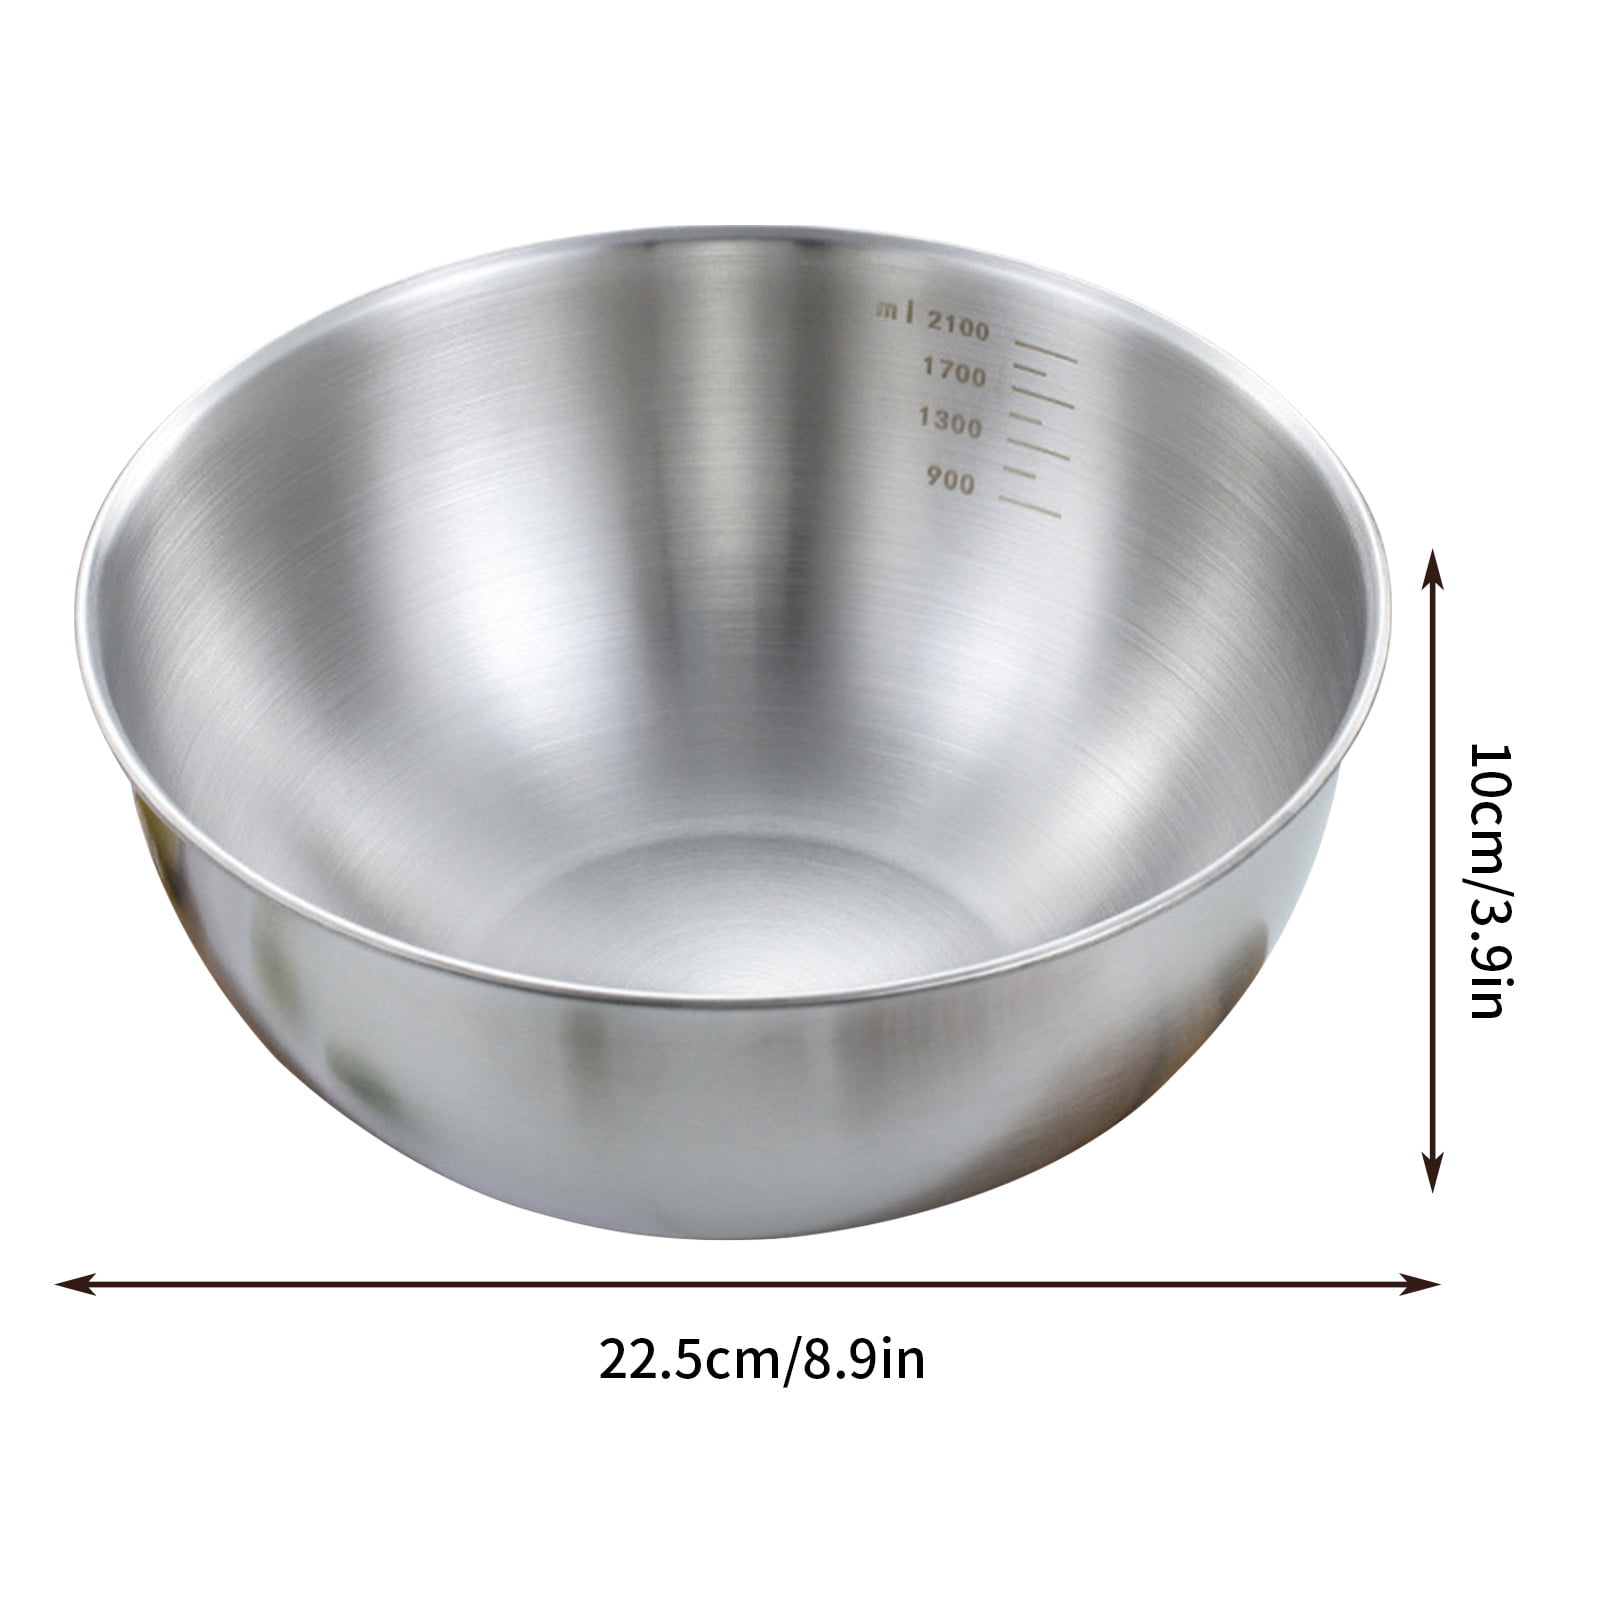 HIC Kitchen Mixing Bowl, Heavyweight 18/8 Stainless Steel, 6-Quart Capacity